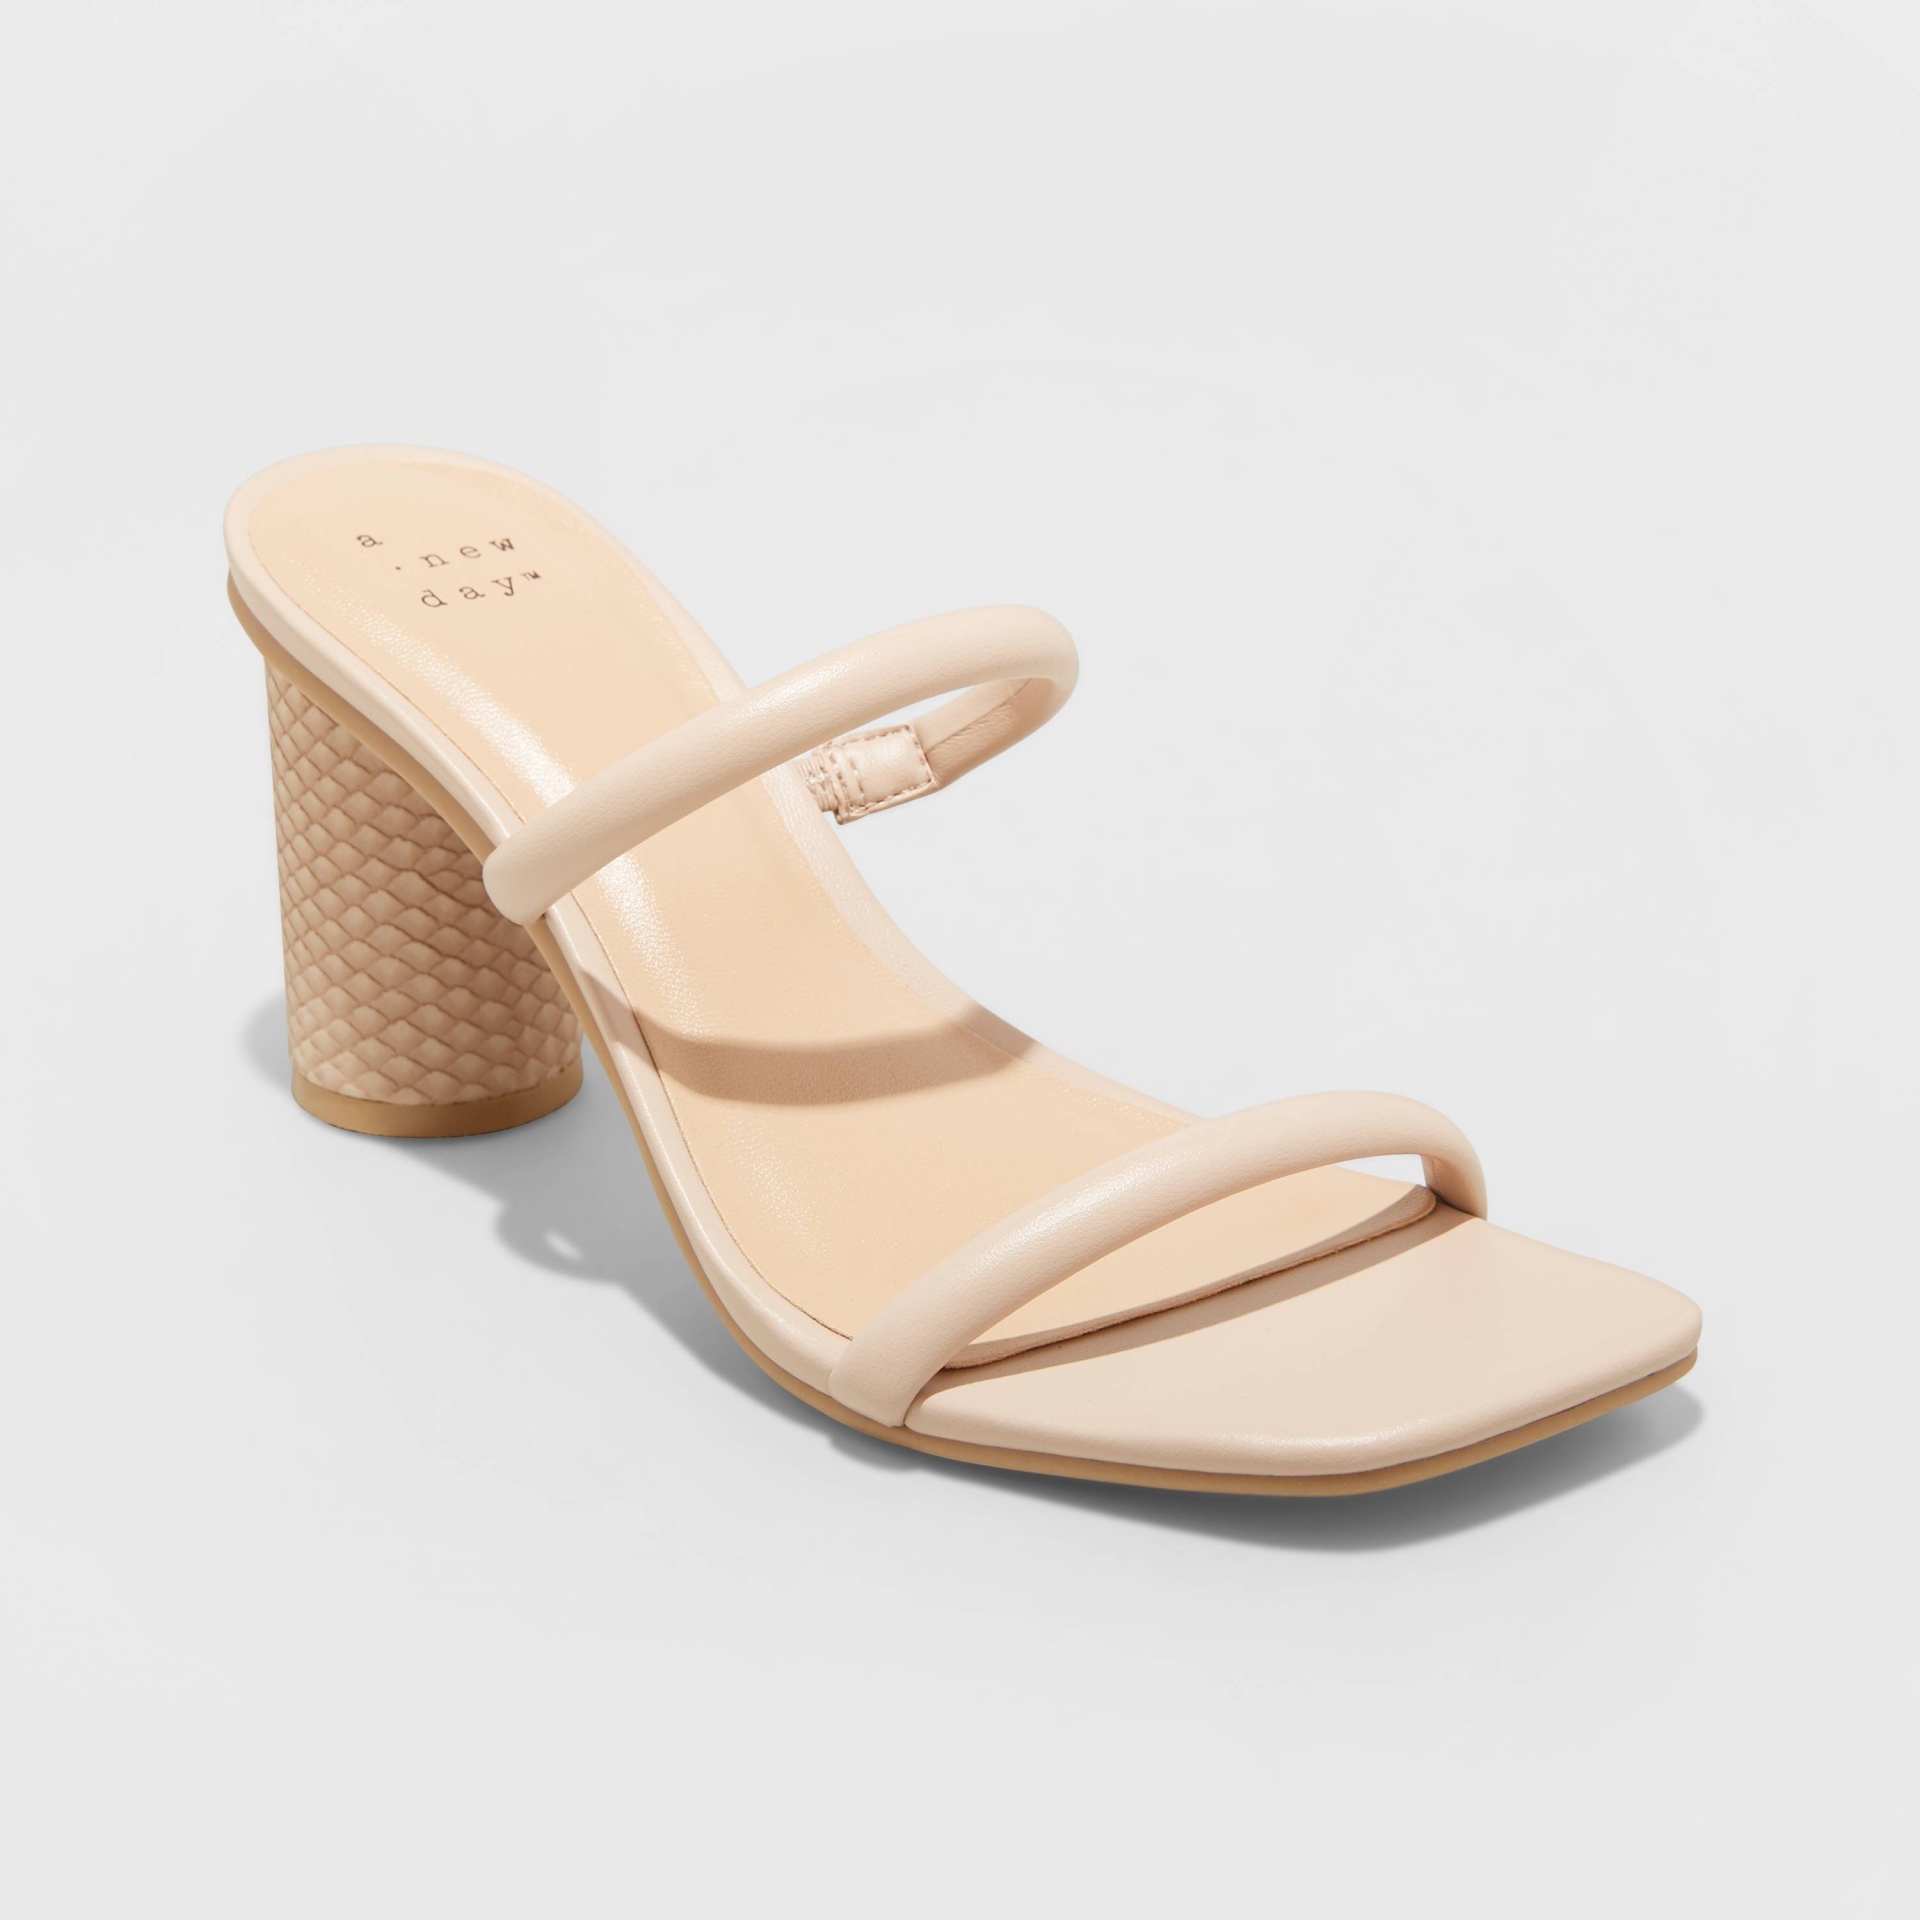 slide 1 of 4, Women's Cass Square Toe Heels - A New Day Nude 6.5, 1 ct